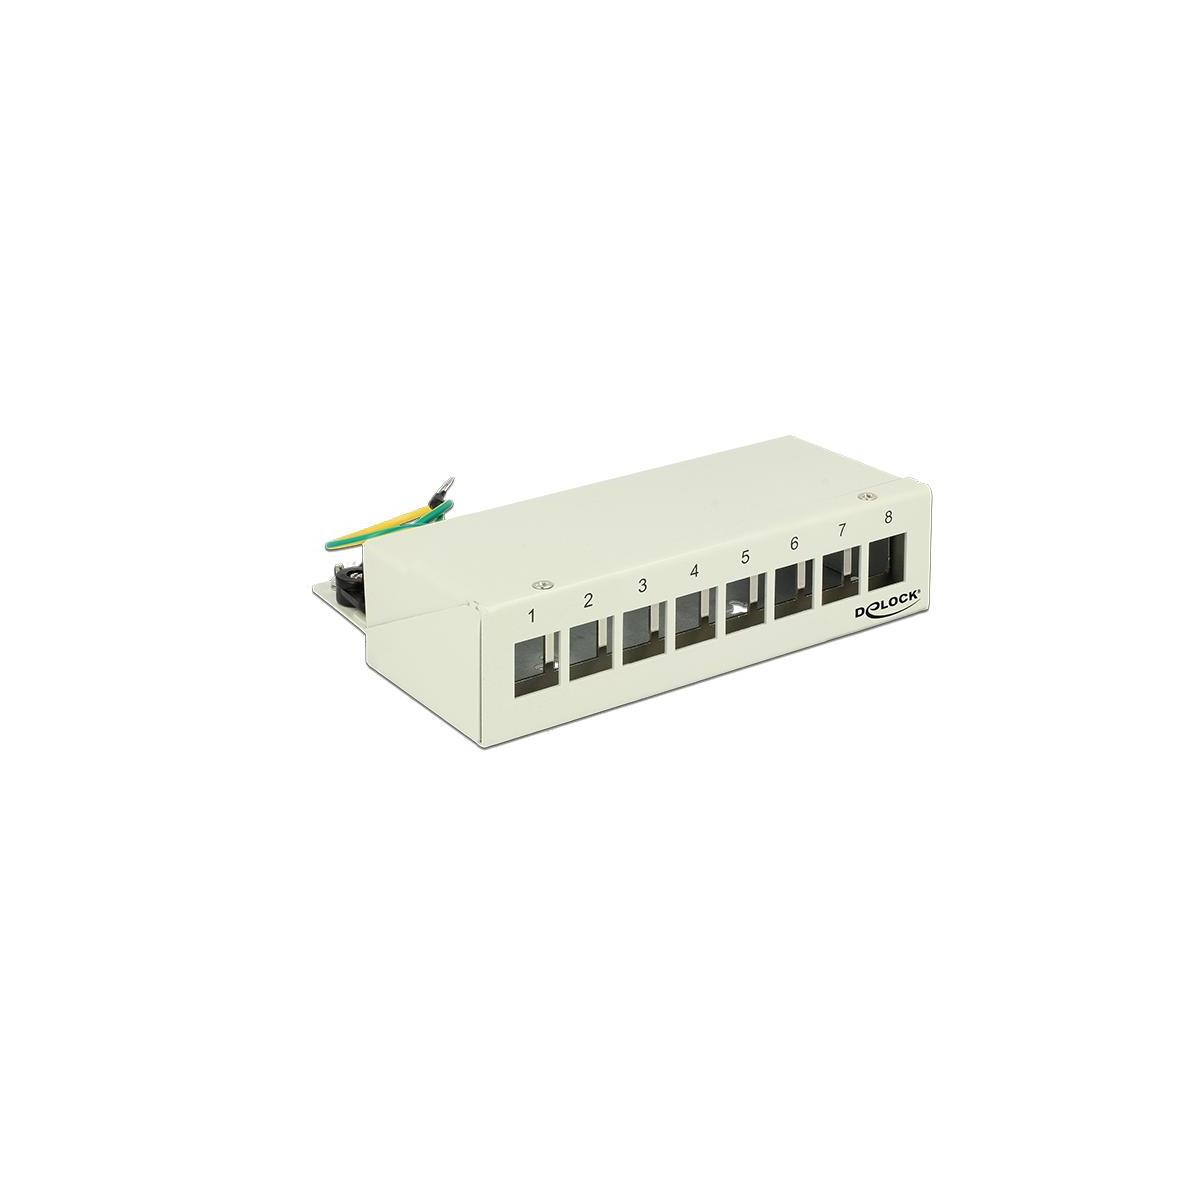 DELOCK 43336 Patchpanel